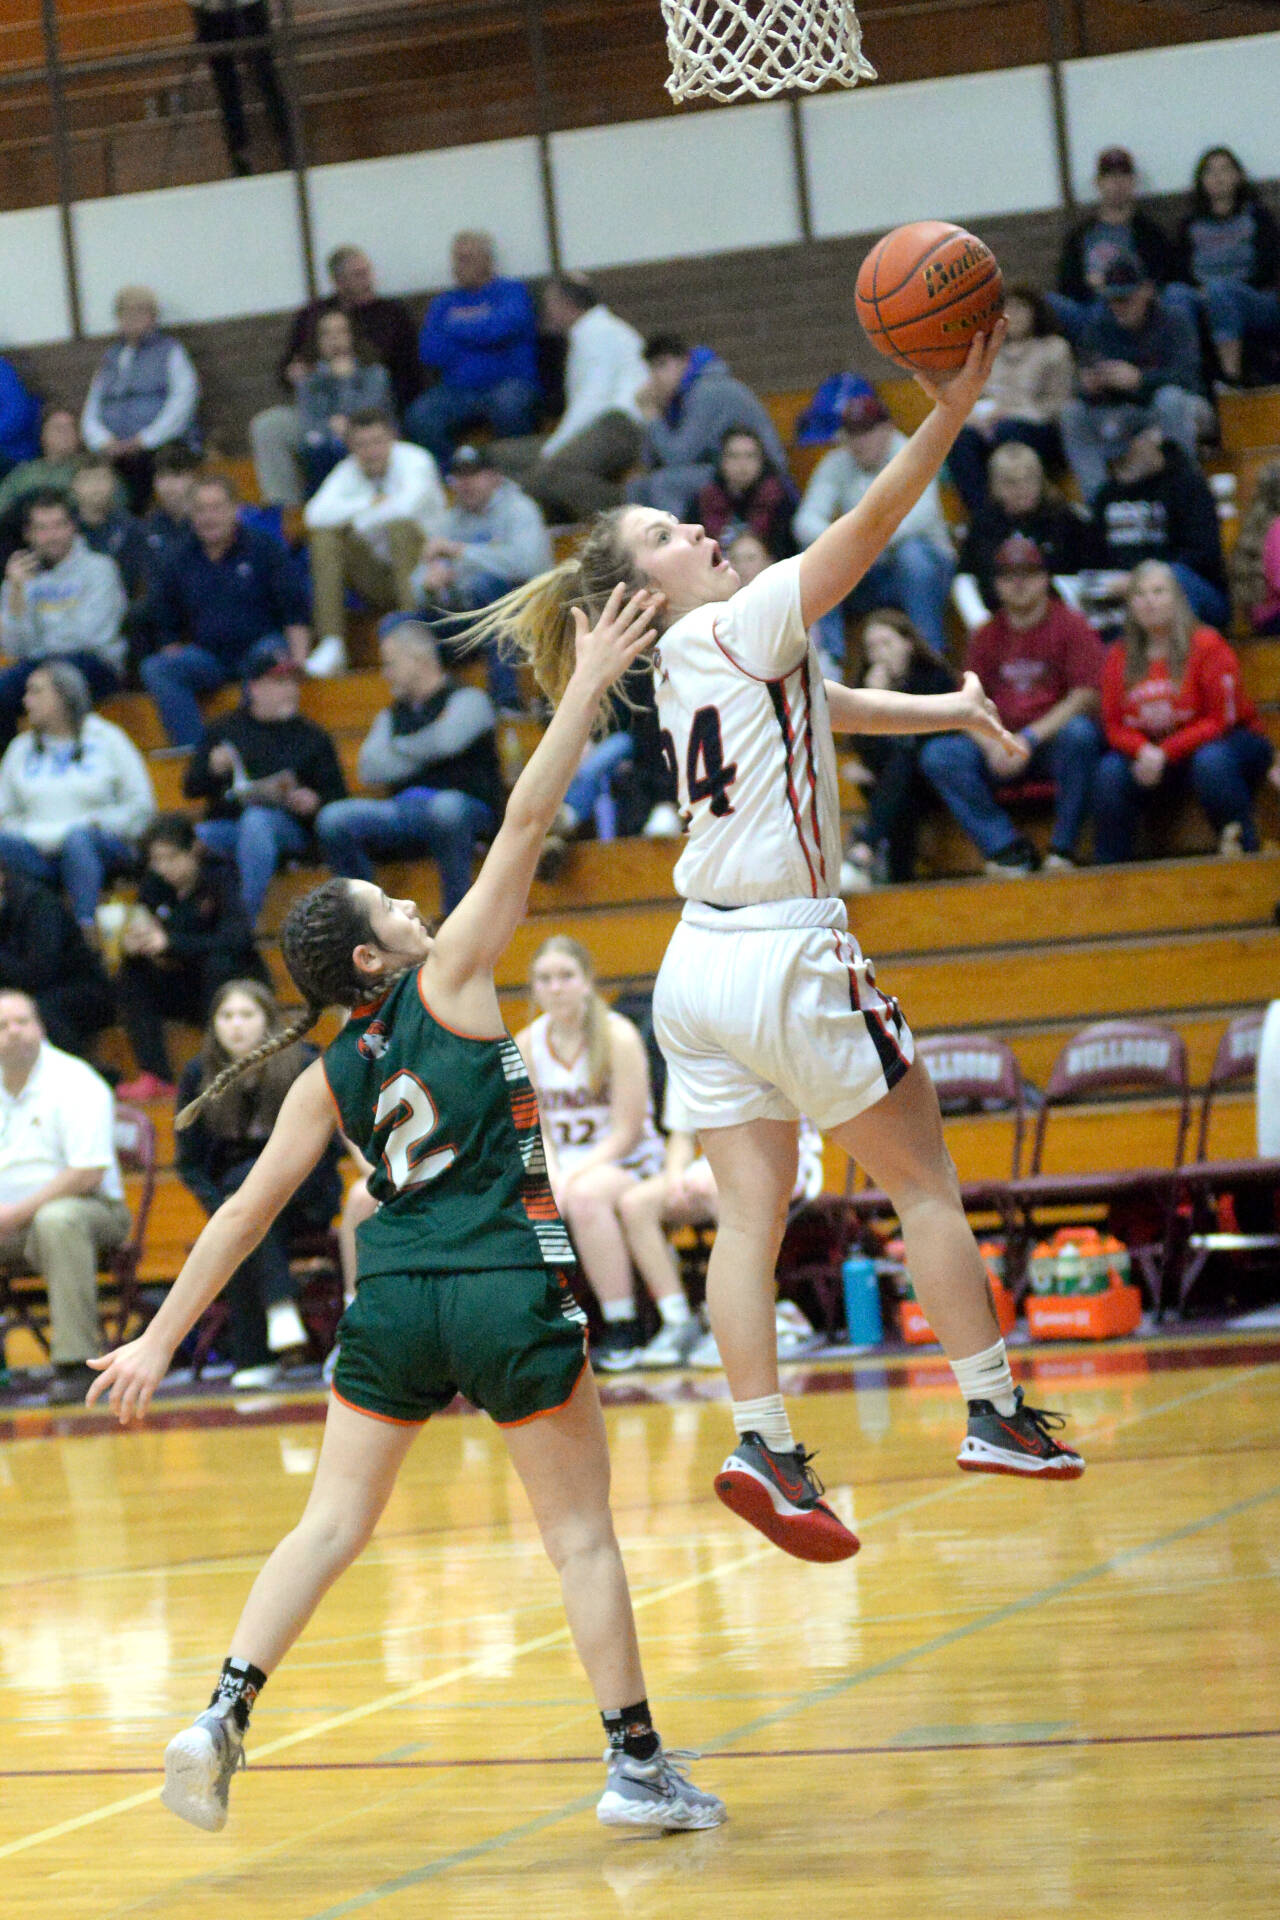 RYAN SPARKS | THE DAILY WORLD Raymond sophomore Karsyn Freeman (24) glides to the basket against Morton-White Pass defender Malia Armstrong during the Seagulls’ 60-41 first-round victory in the 2B District 4 Tournament on Saturday at Montesano High School.